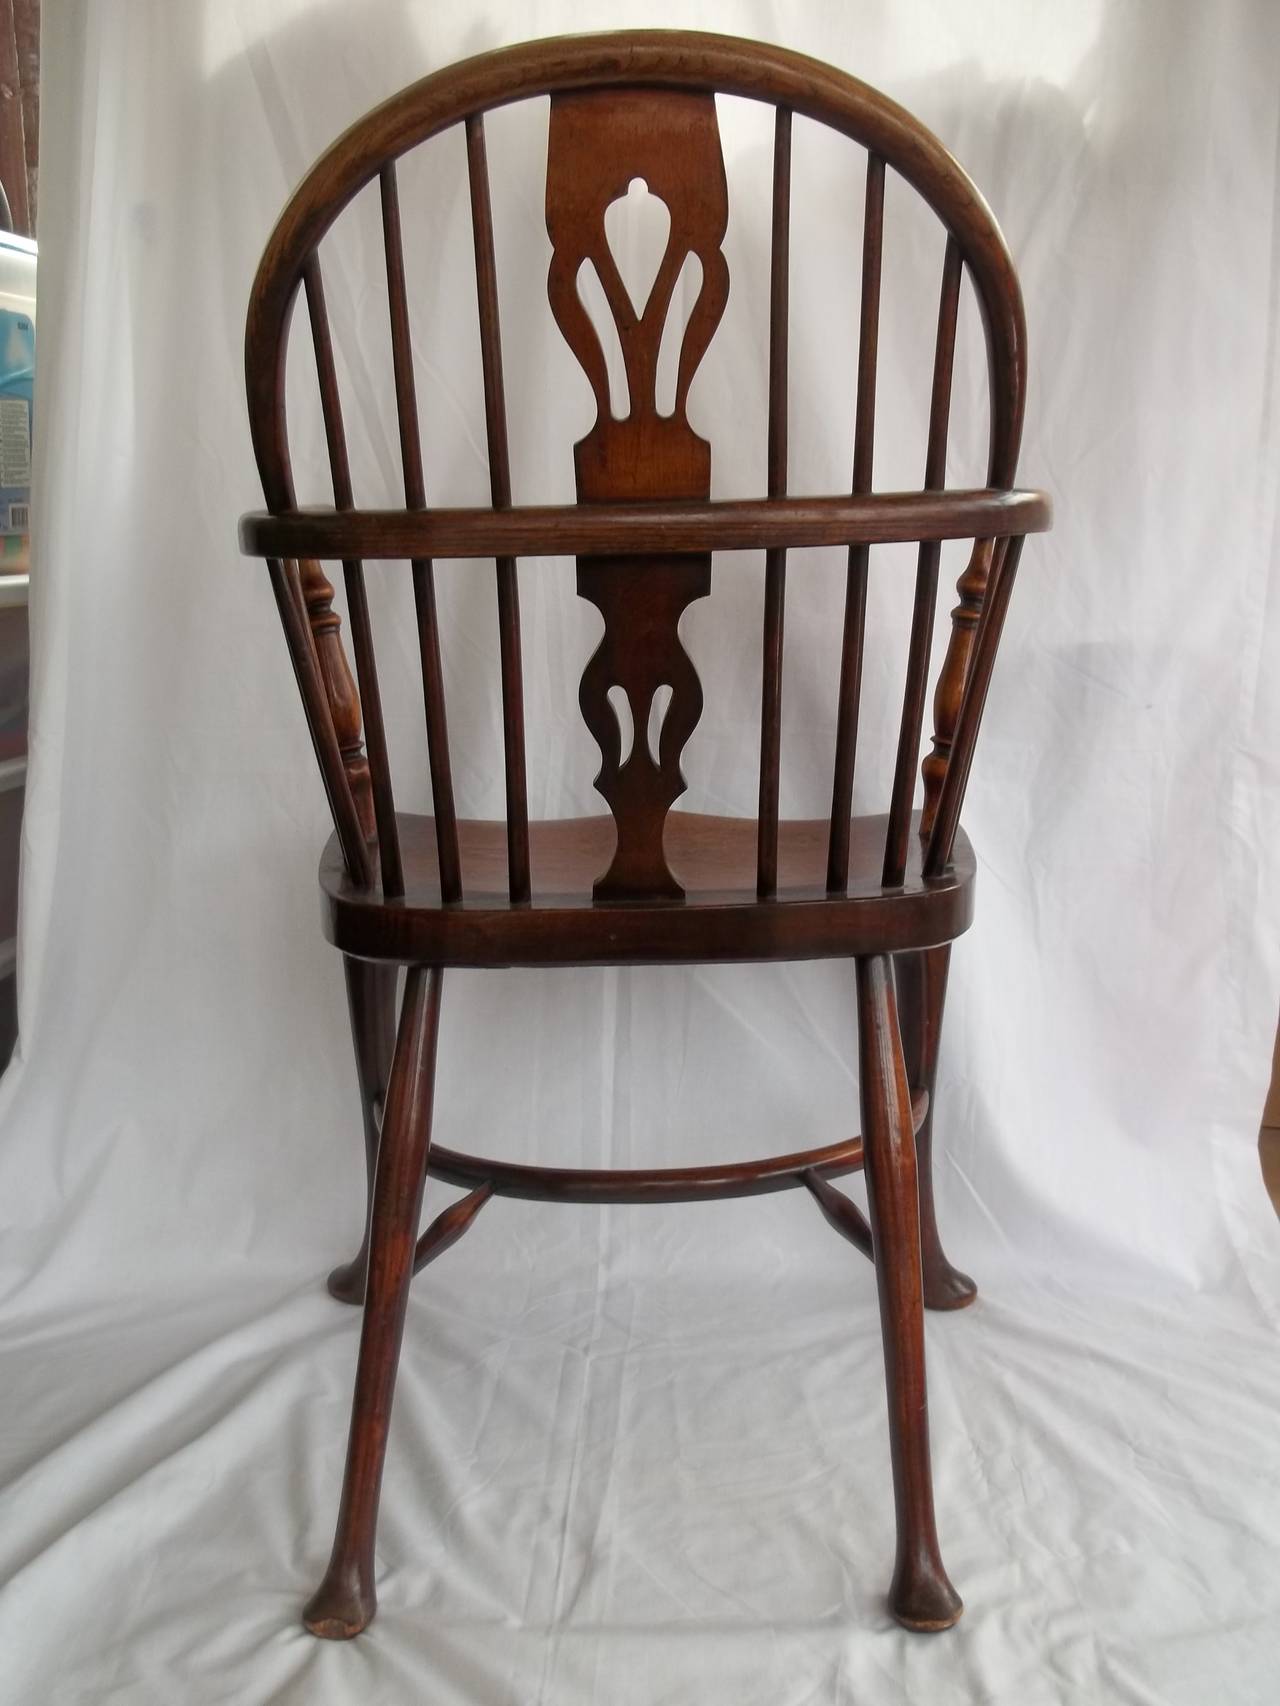 Hand-Crafted 19th Century Low-Back Windsor Armchair with Cabriole Legs